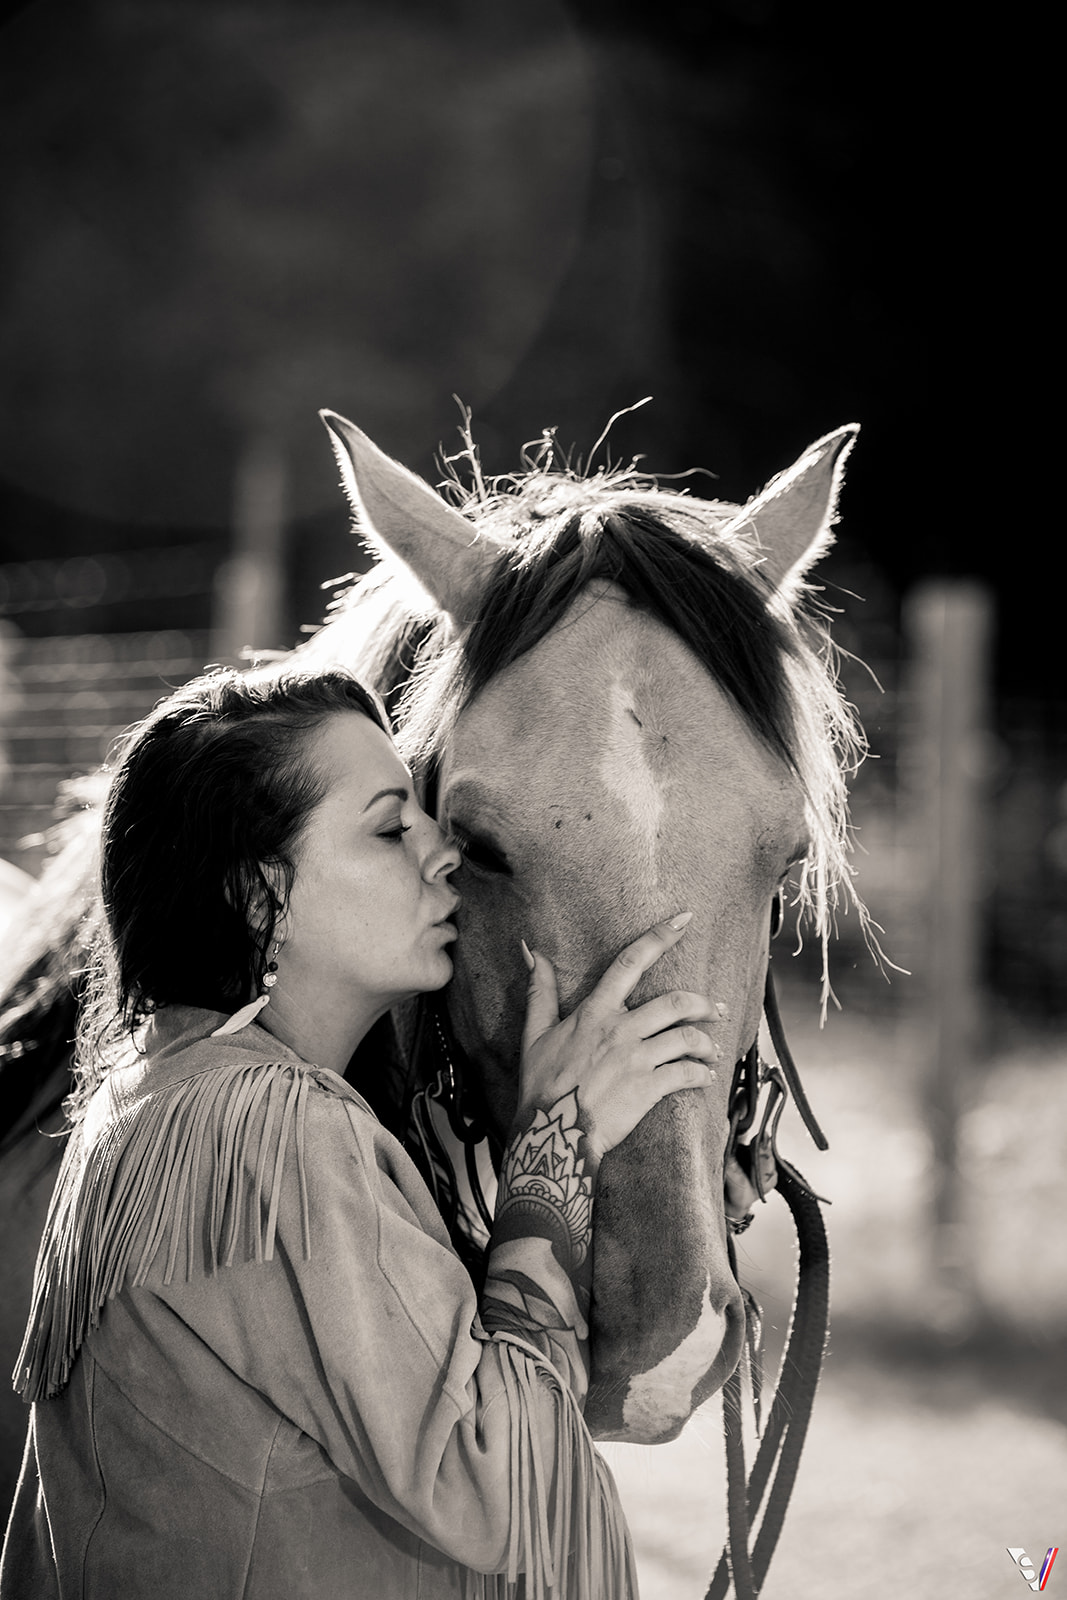 The Art of Equine Portraiture: Capturing the Beauty of Horses.